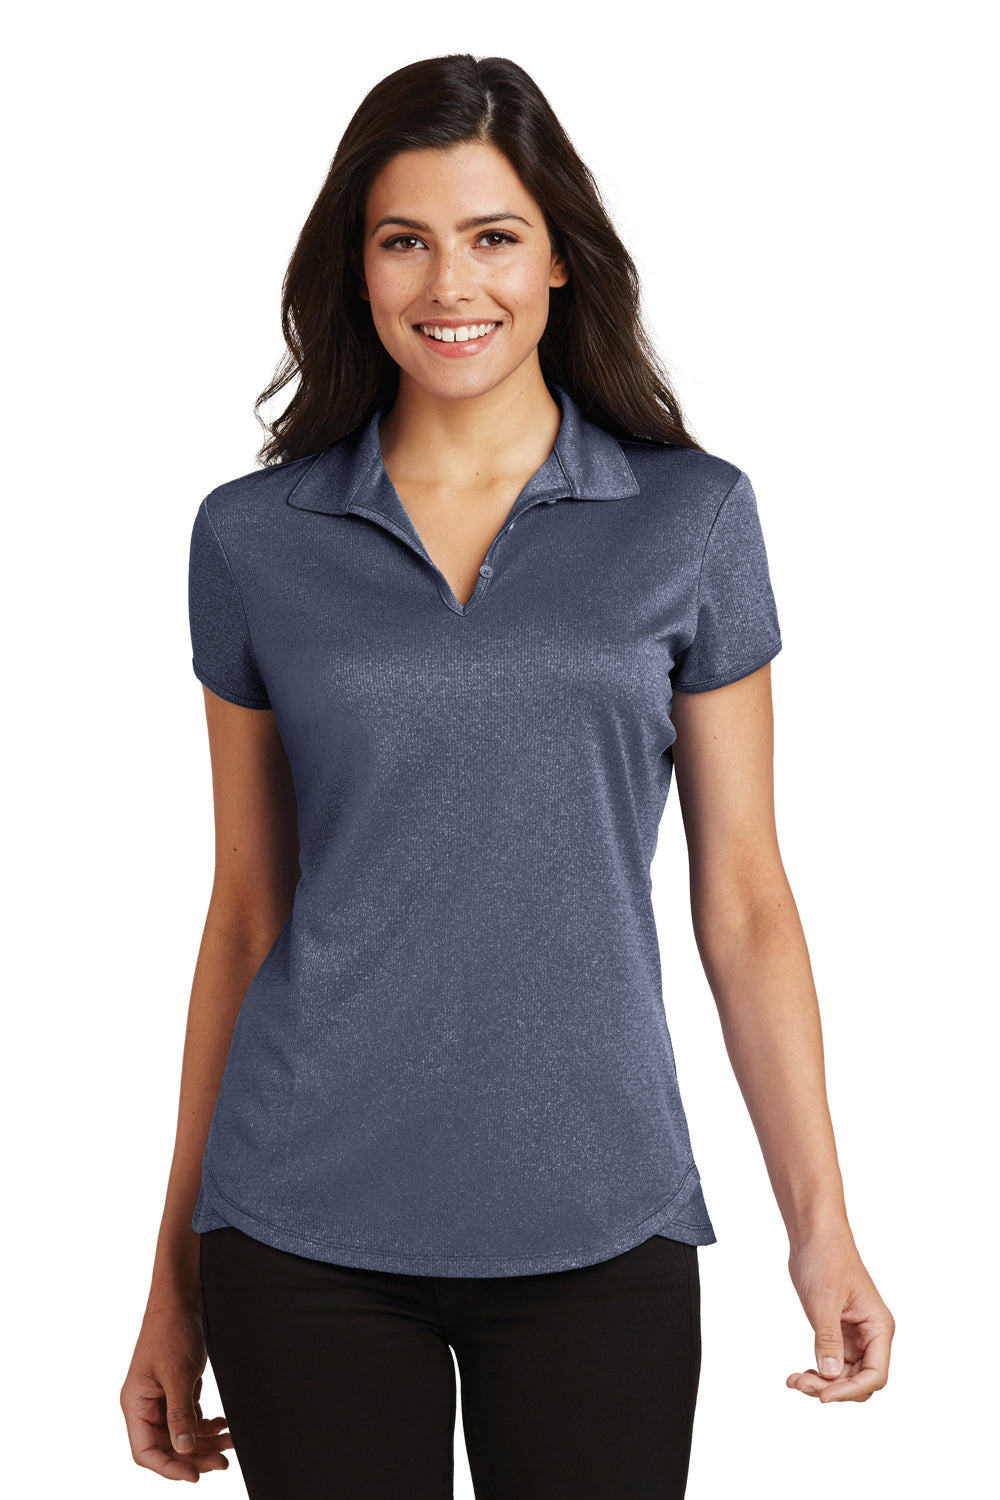 Port Authority L576 Womens Trace Moisture Wicking Short Sleeve Polo Shirt Heather Navy Blue Front